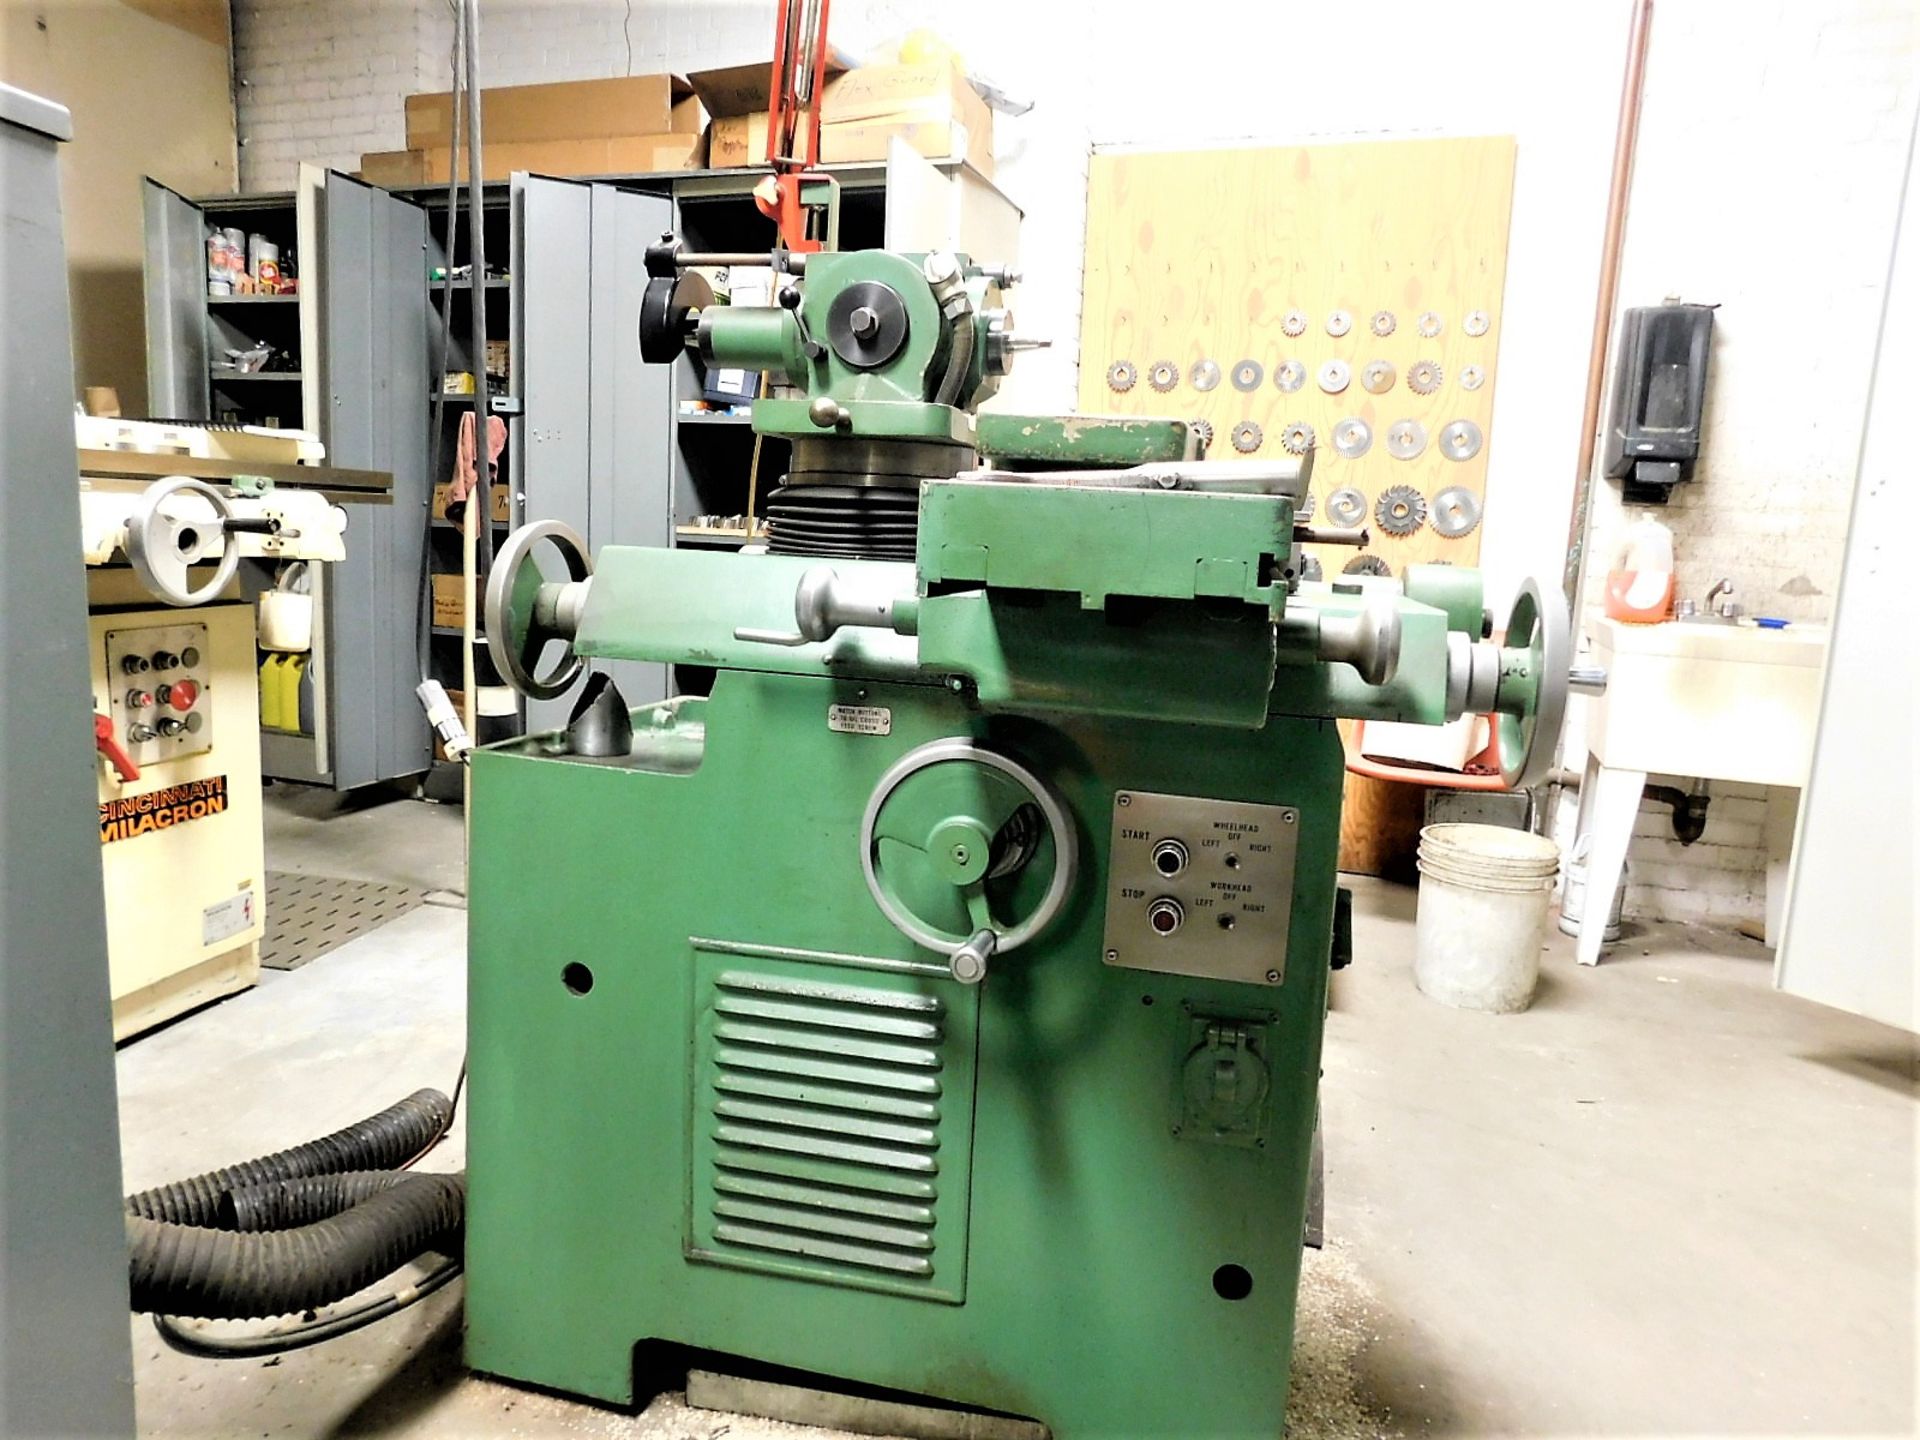 CINCINNATI 6" X 36" NO. 2 TOOL AND CUTTER GRINDER, CIMTROL CONTROL SYSTEM, S/N 1D2T6P-146, POPE - Image 2 of 8